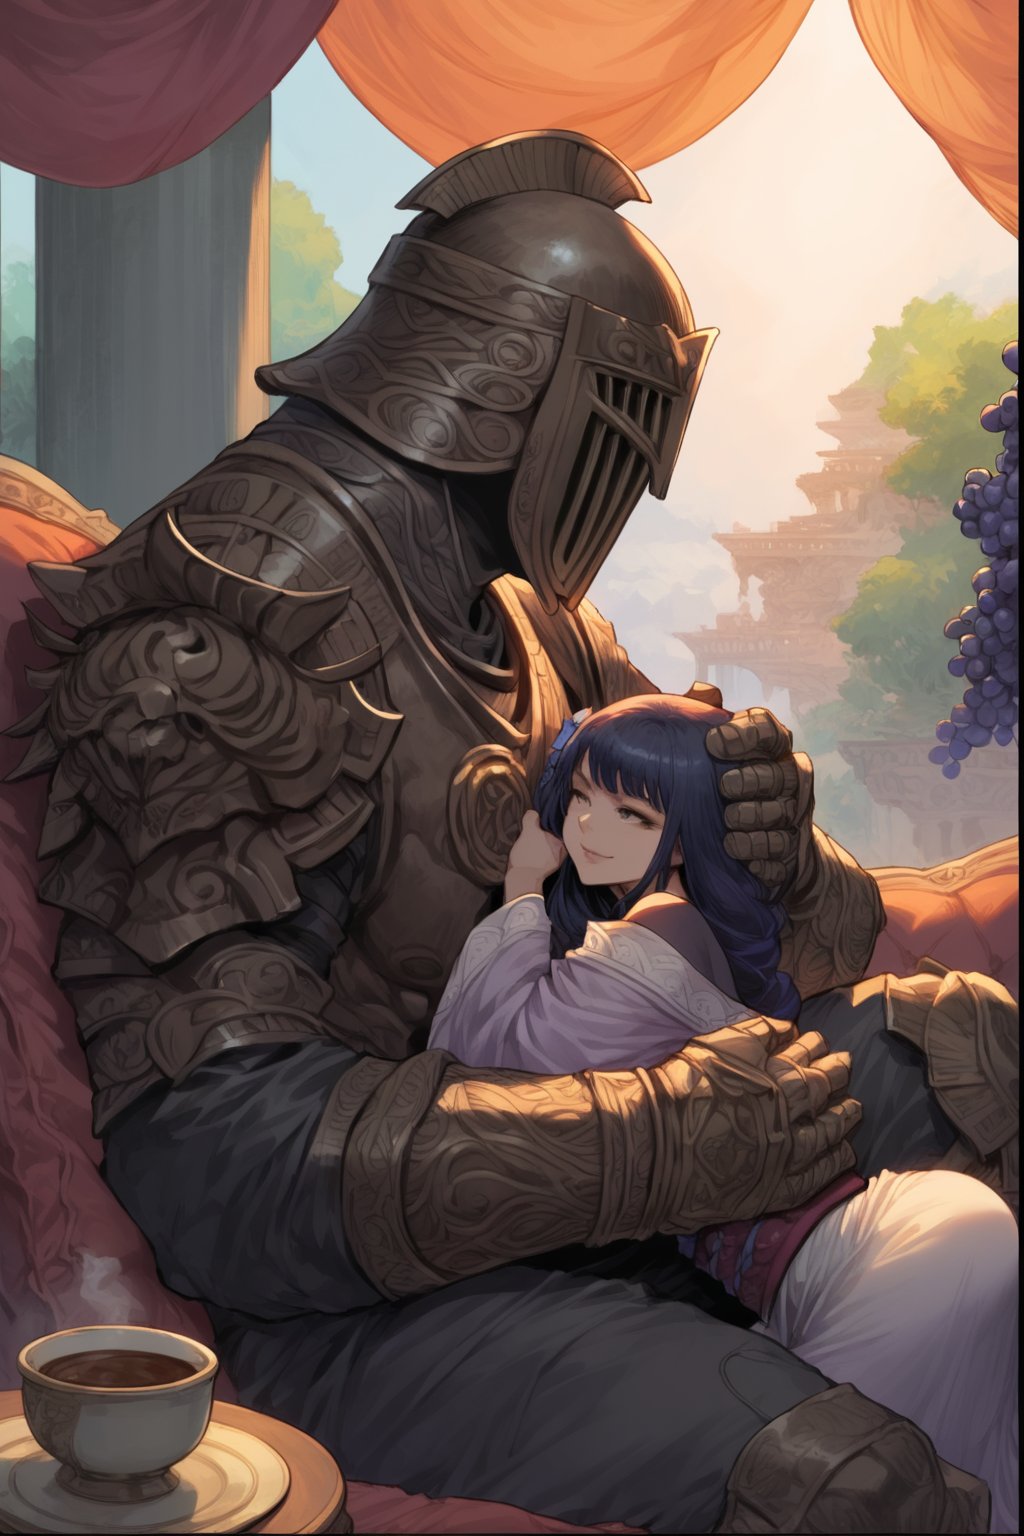 score_9, score_8, score_7, score_8_up, 1boy\(human, giant male, tall male, wearing full madness Armor and helmet, (no-face), armored, from side\) laying and holding womn\(Raiden Shogun, smile on their face, pouty lips, seductive, wearing dress, jewellery, gold\), hugging and resting, sitting on his lap, both staring at him, Arabian garden, pillows, coffee and grapes, score_7_up, csr style, anime, (comic style, comic page, detailed comic with panels),Comics style pony